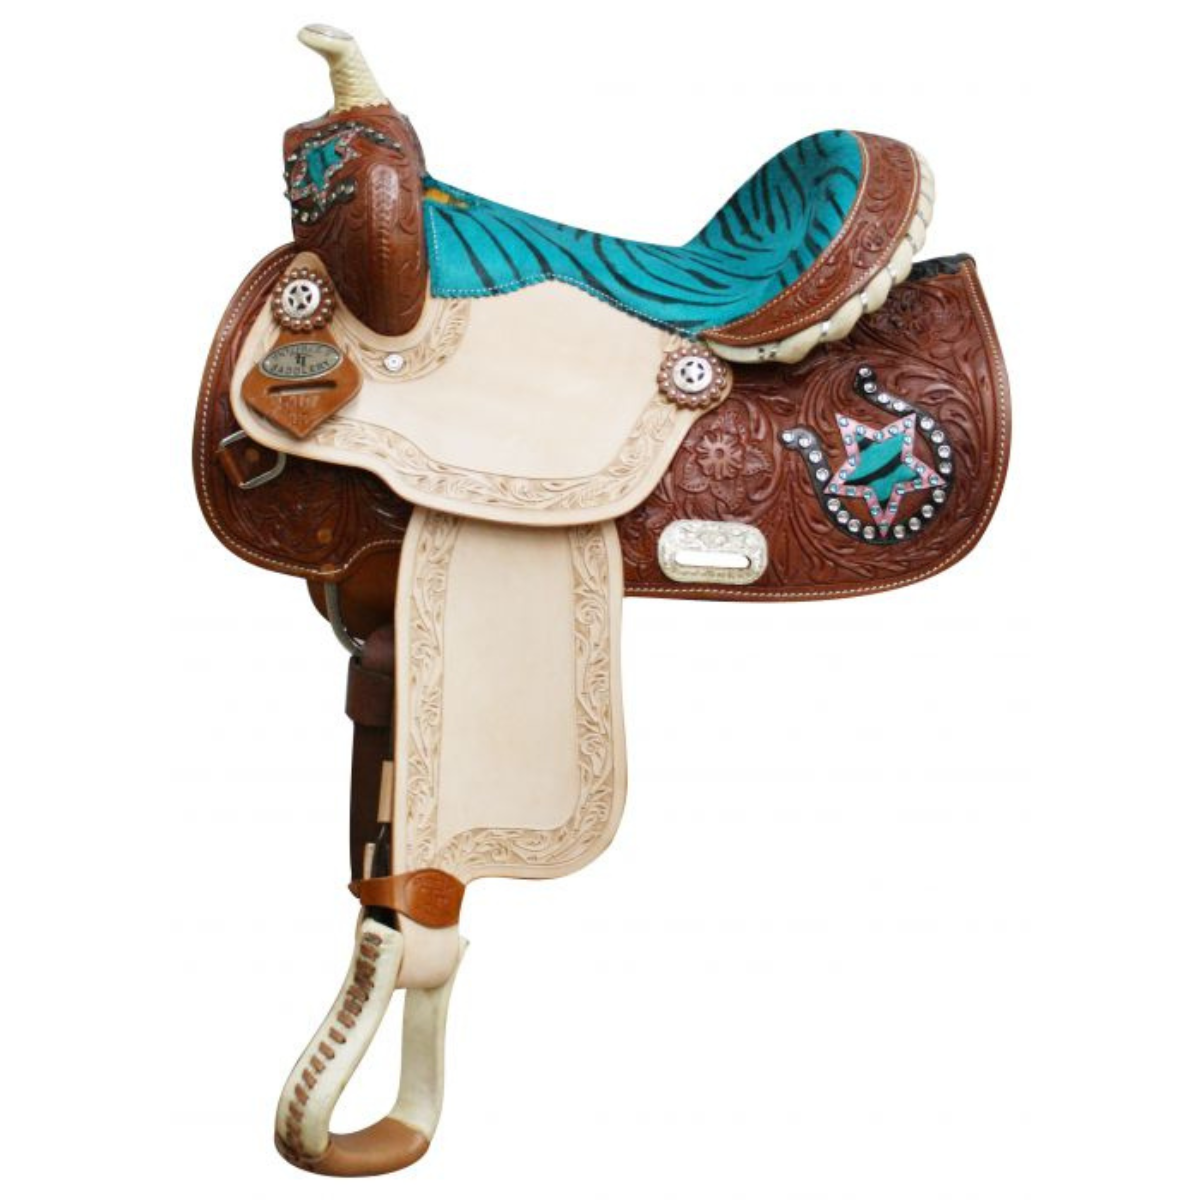 13" DOUBLE T YOUTH/ PONY SADDLE WITH HAIR ON ZEBRA PRINT SEAT AND HORSE SHOE AND STAR ACCE - Double T Saddles